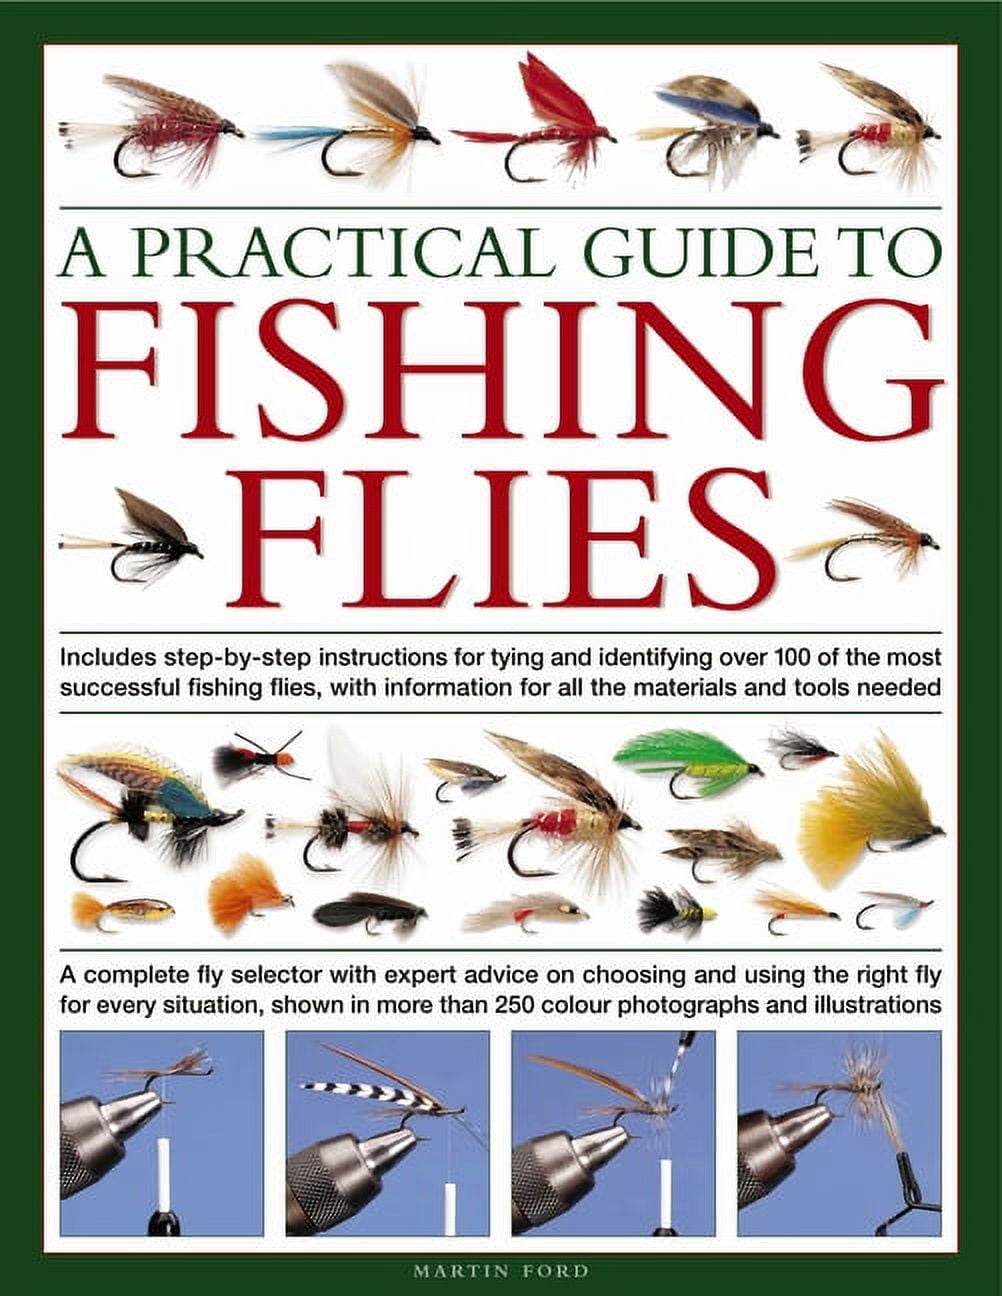 A Practical Guide to Fishing Flies: A Complete Fly Selector with Expert Advice on Choosing and Using the Right Fly for Every Situation [Book]